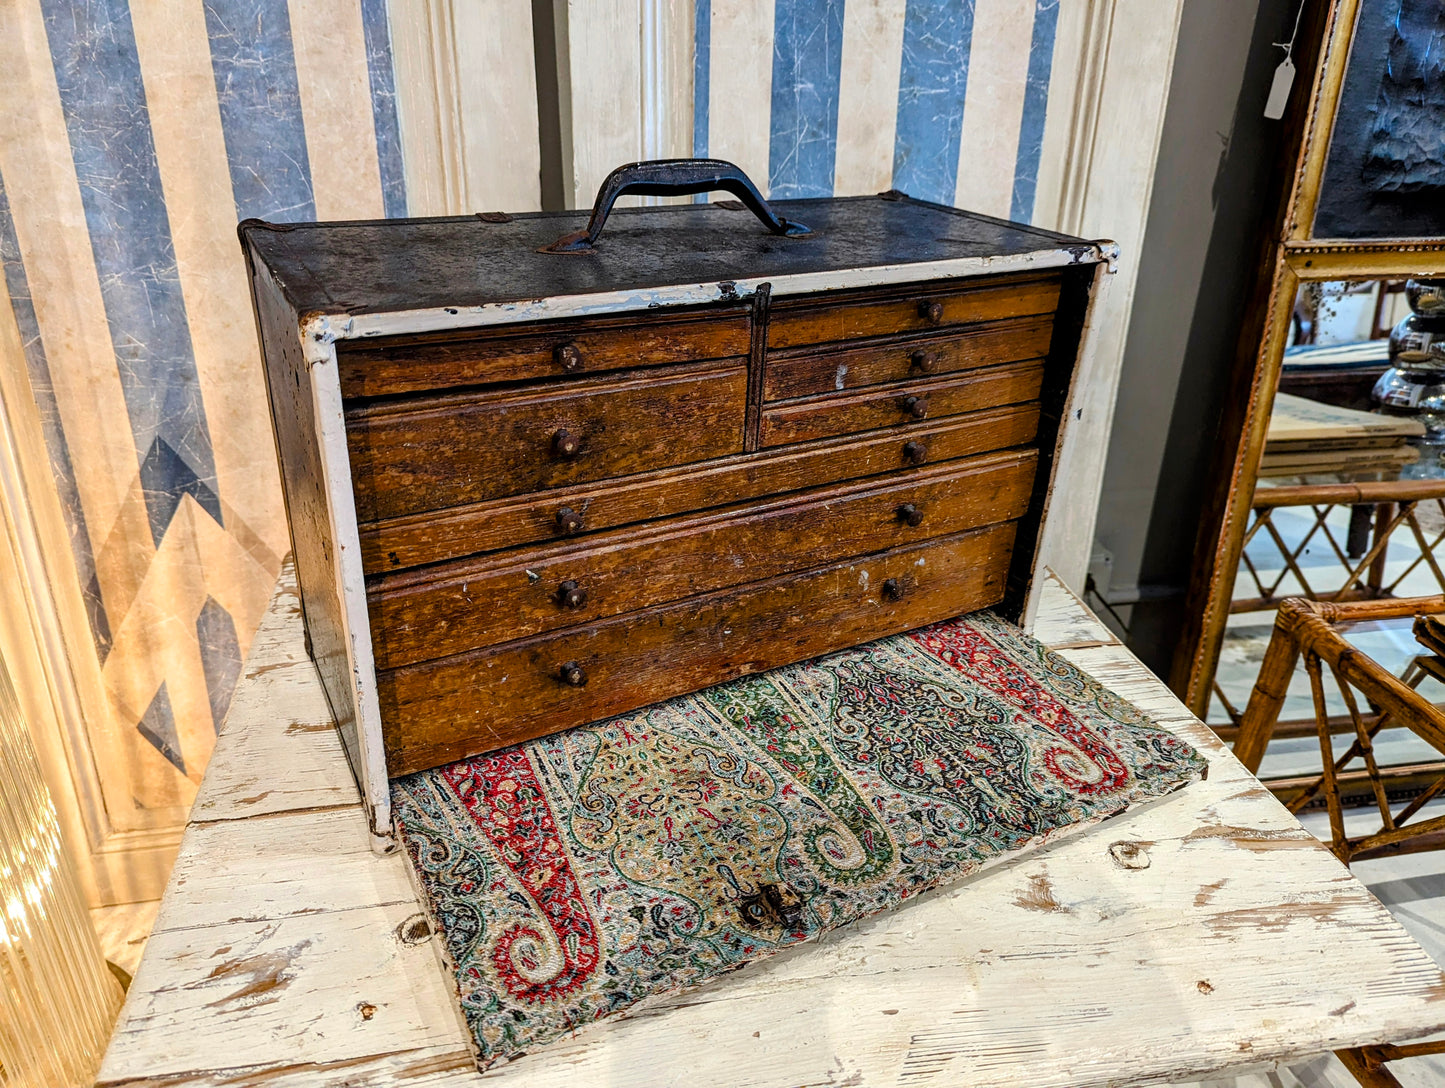 Carpenters tool box. With vintage fabric on front